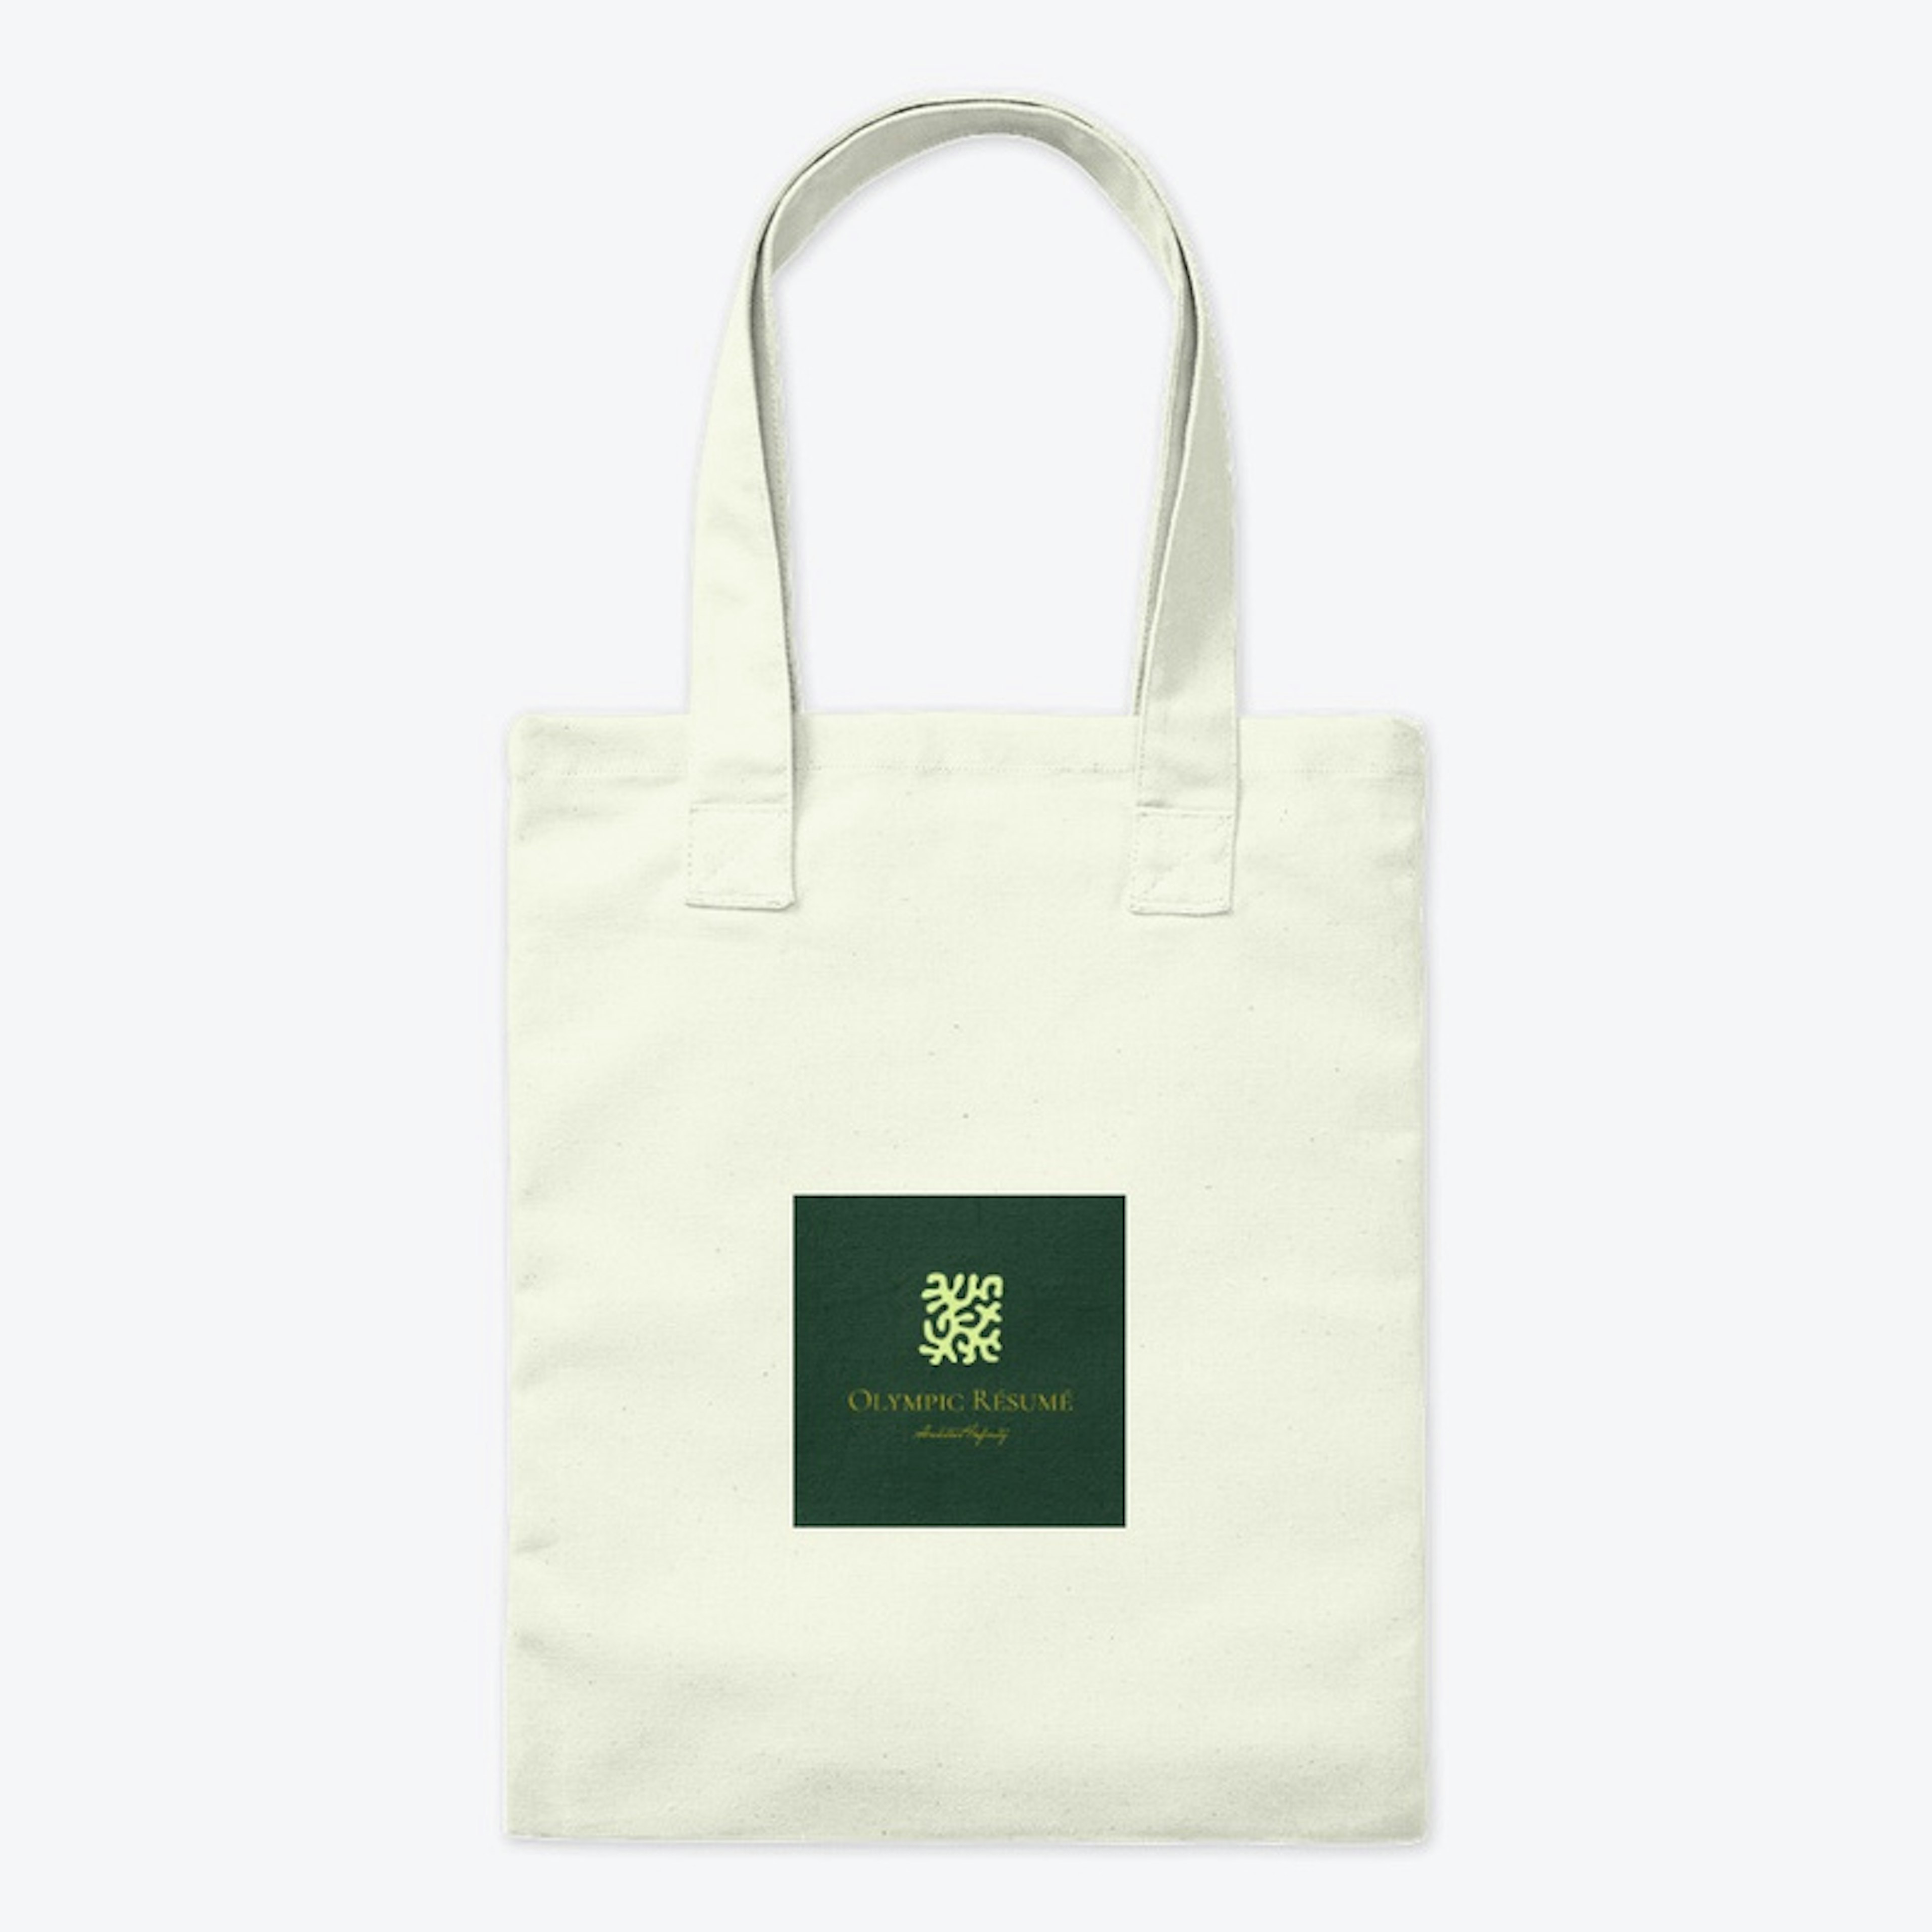 Olympic Resume Turbo Tote | Minty